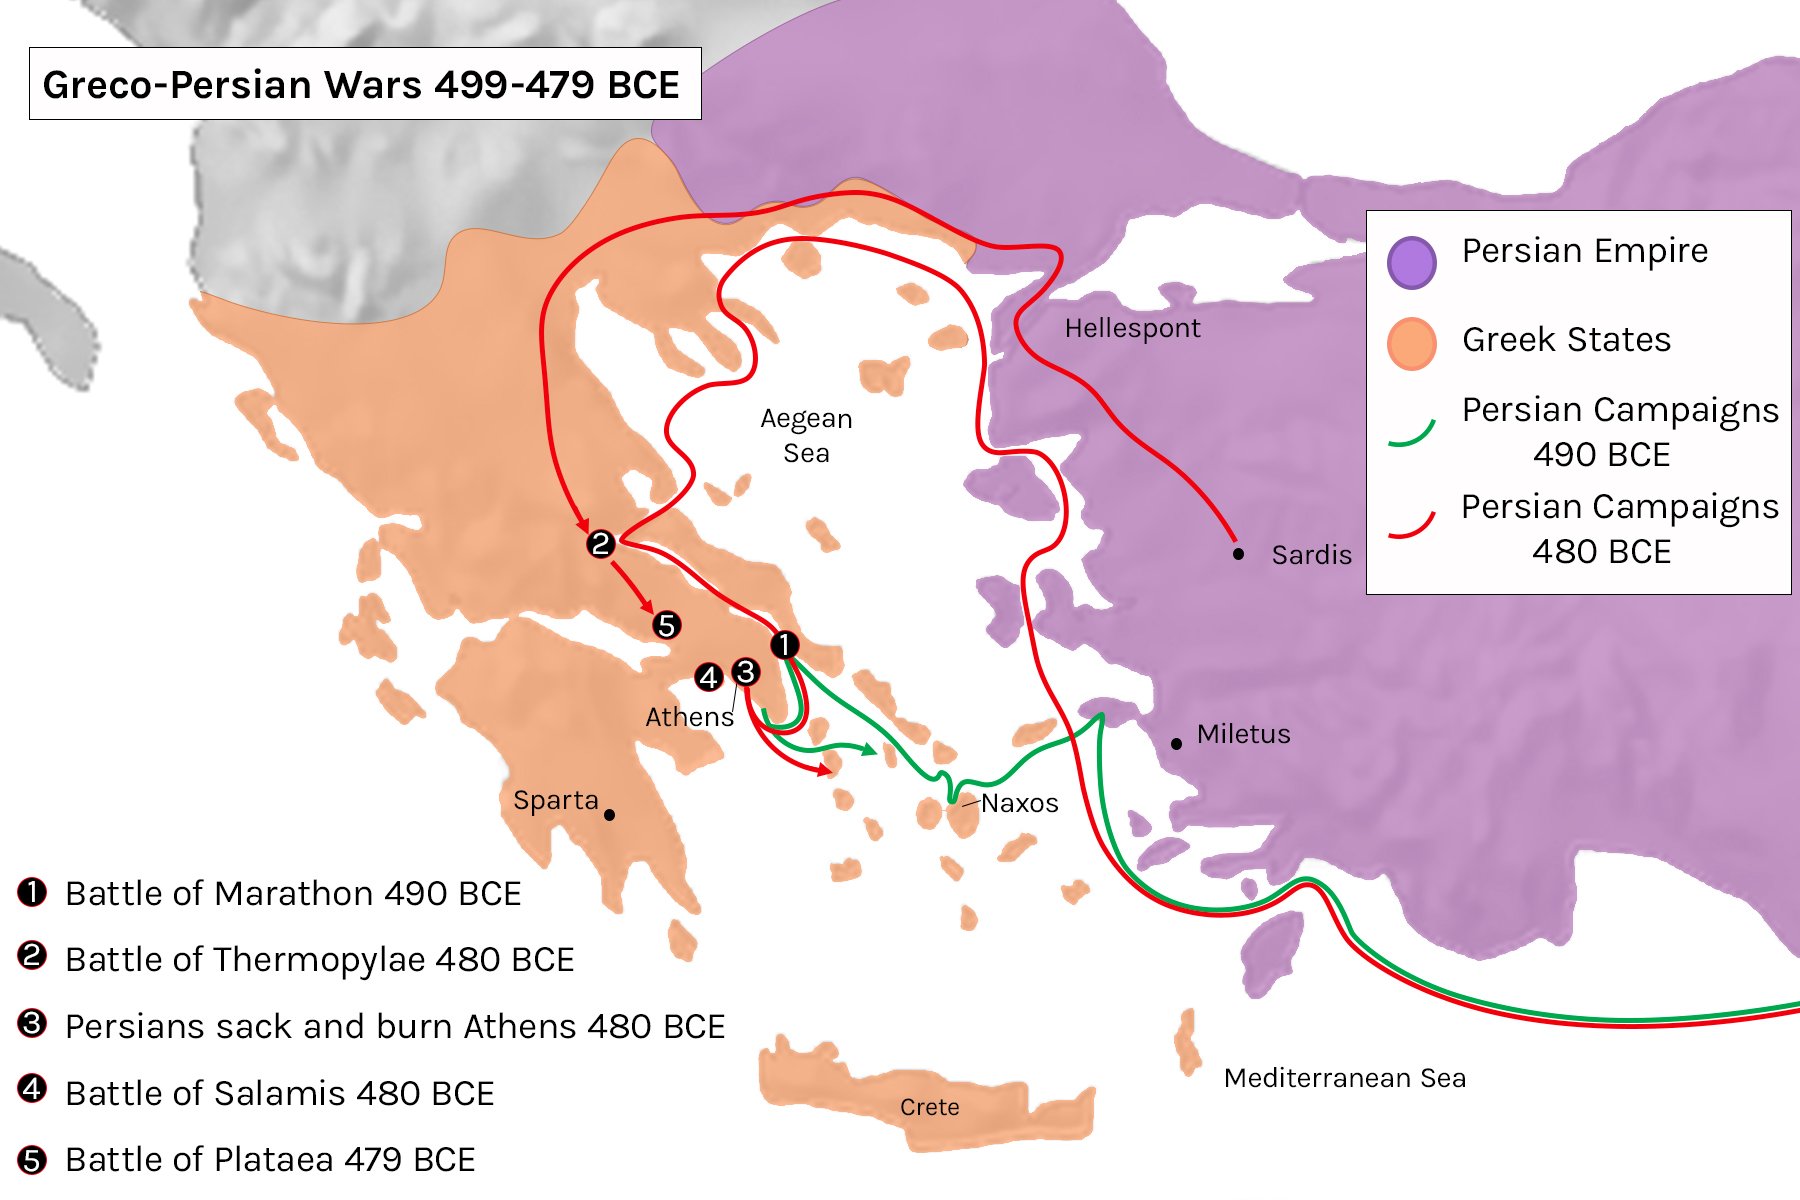 A map of the Greco-Persian Wars showing the Persian Empire, the Greek States, and the campaigns and battles from 499 to 479 BCE.